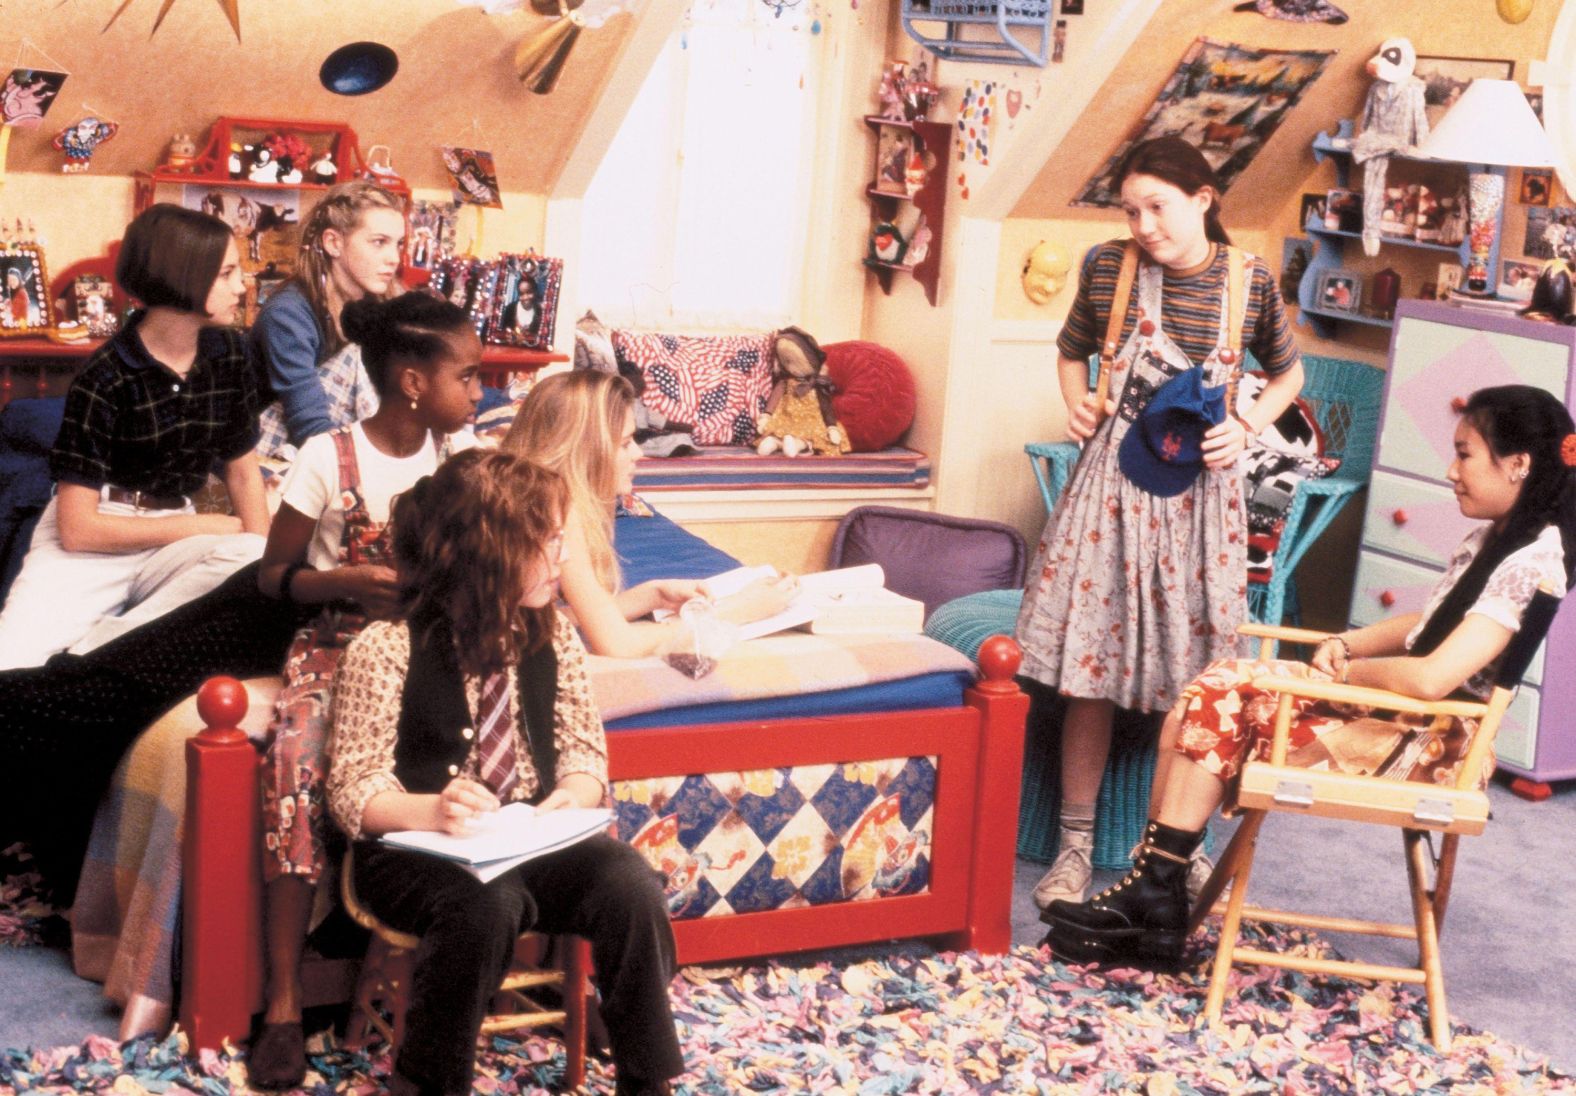 <strong>"The Baby-Sitters Club"</strong>: Based on a series of teen novels written by Ann M. Martin, this film follows the summer of a group of young friends who decide to open a camp. <strong>(Hulu)</strong>